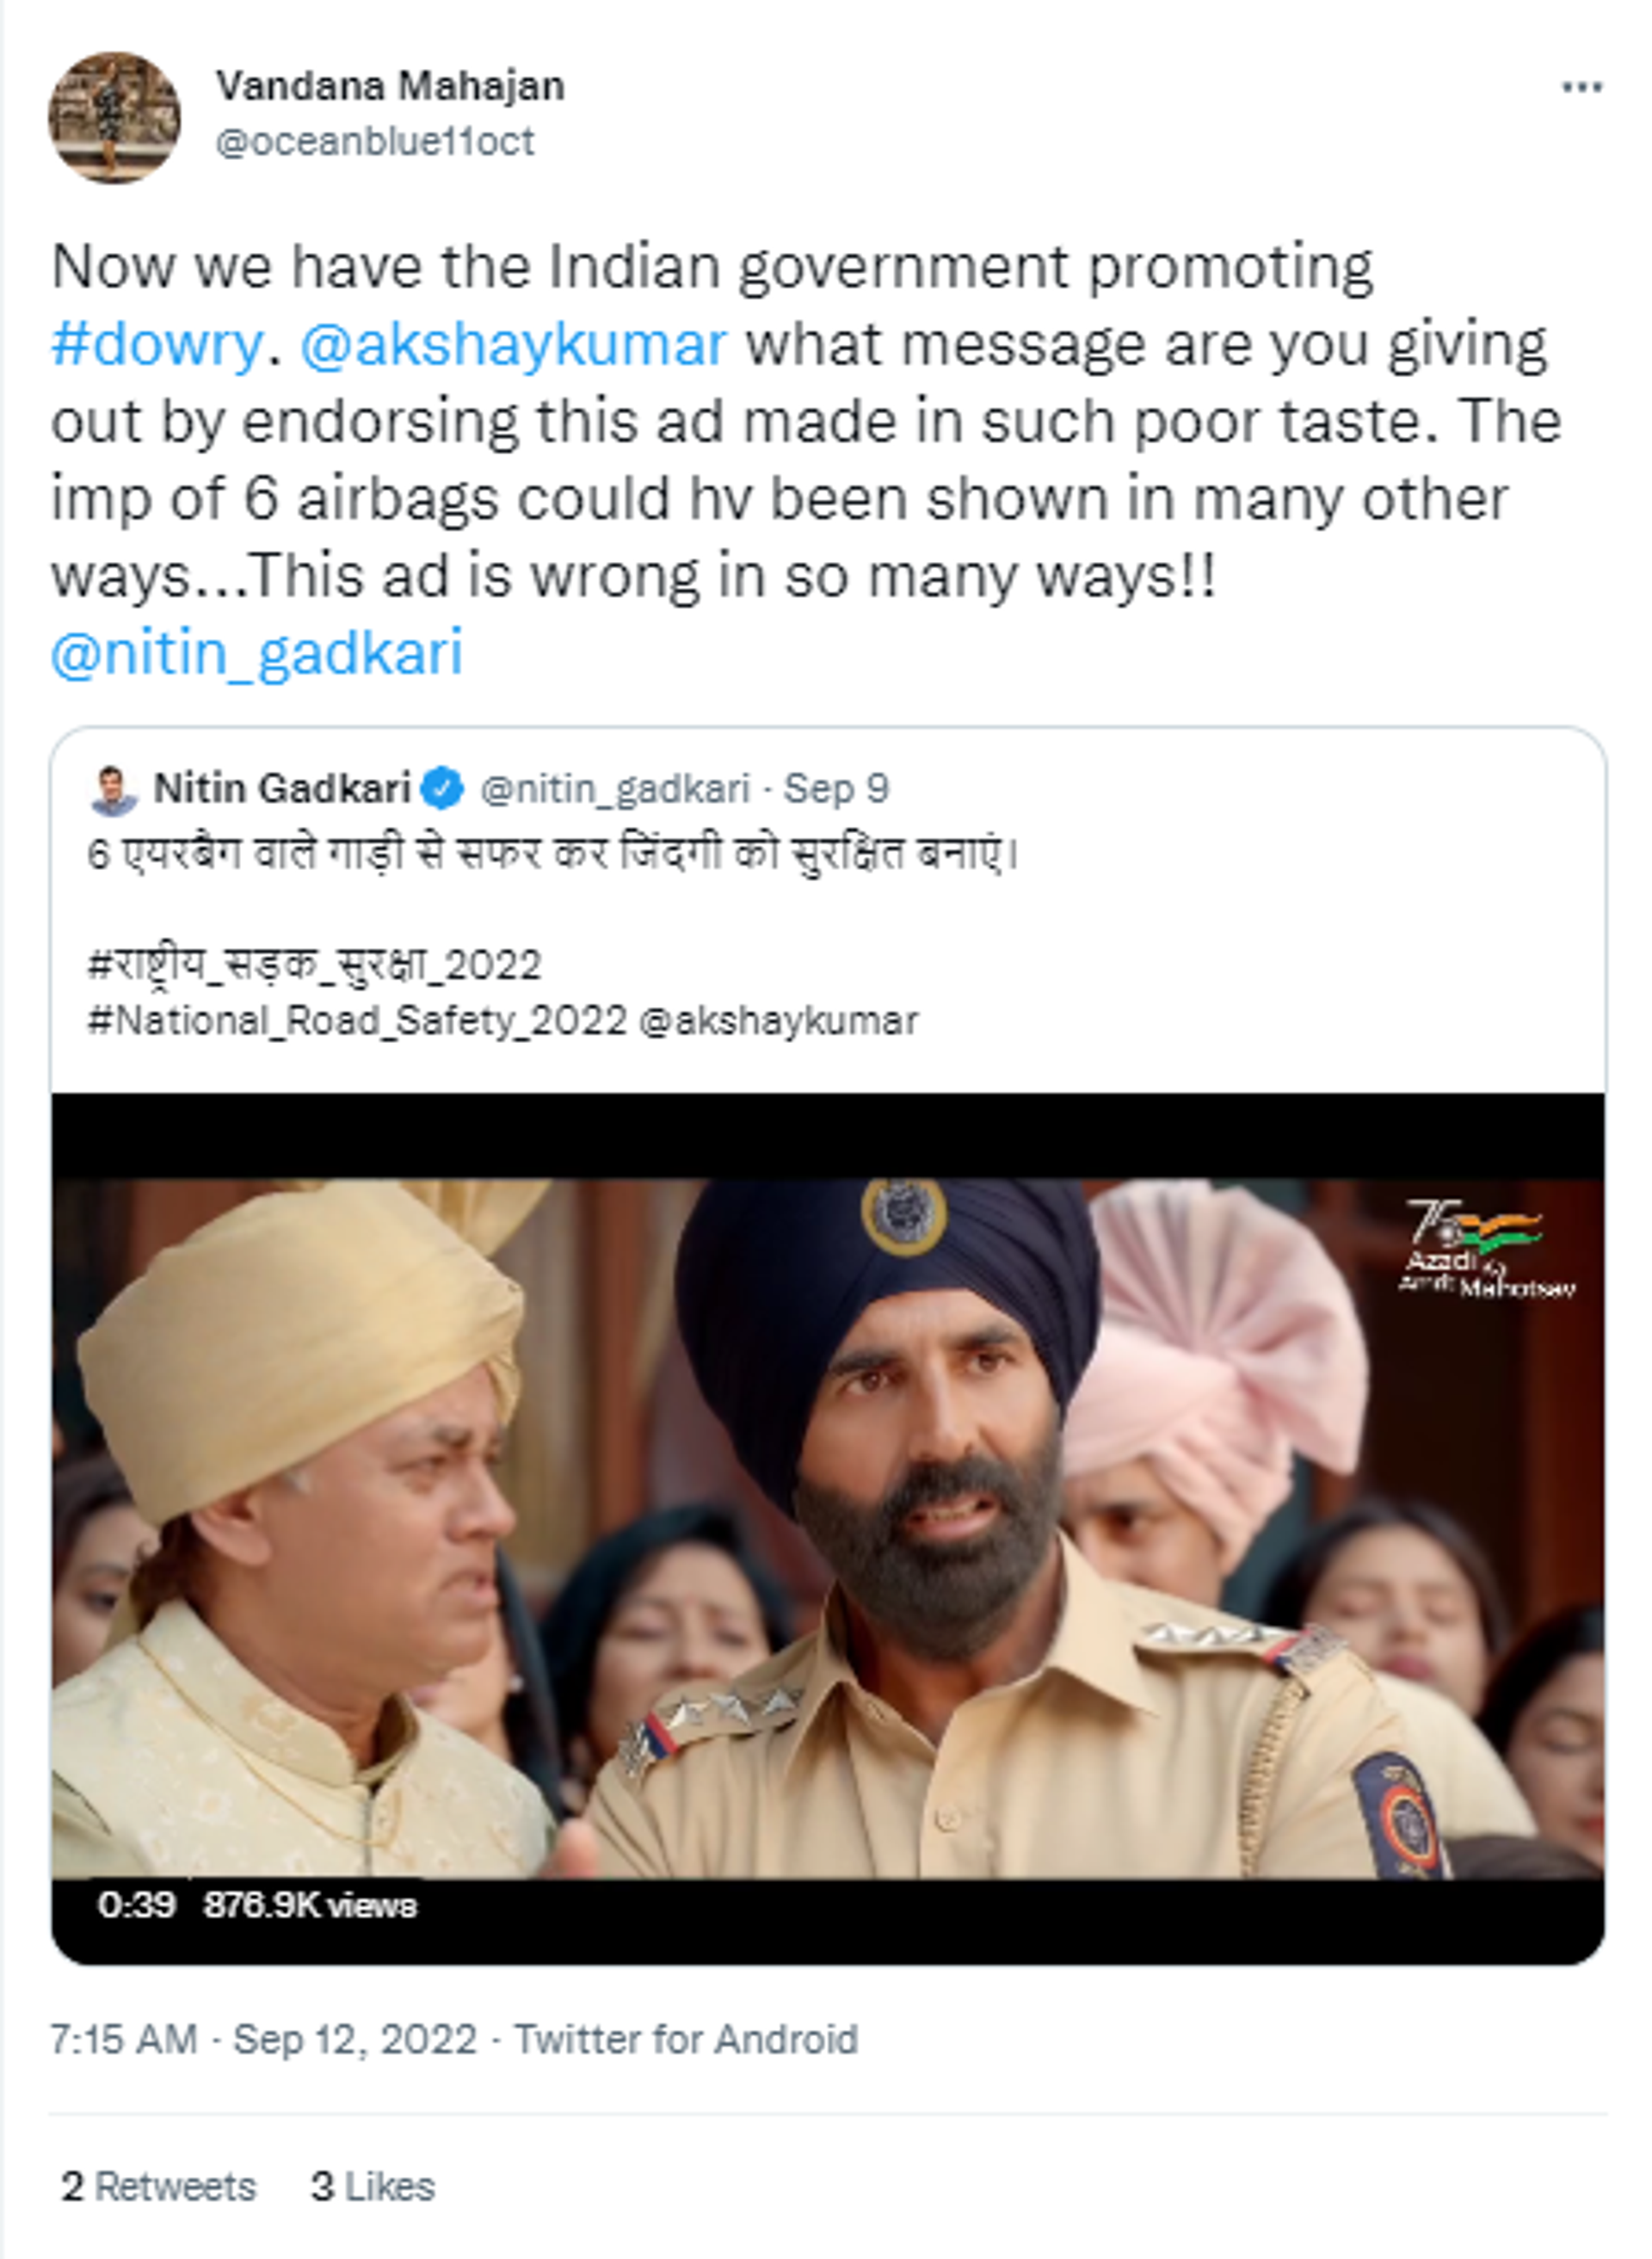 Road safety advertisement featuring Bollywood actor Akshay Kumar faces flak for promoting dowry - Sputnik International, 1920, 12.09.2022